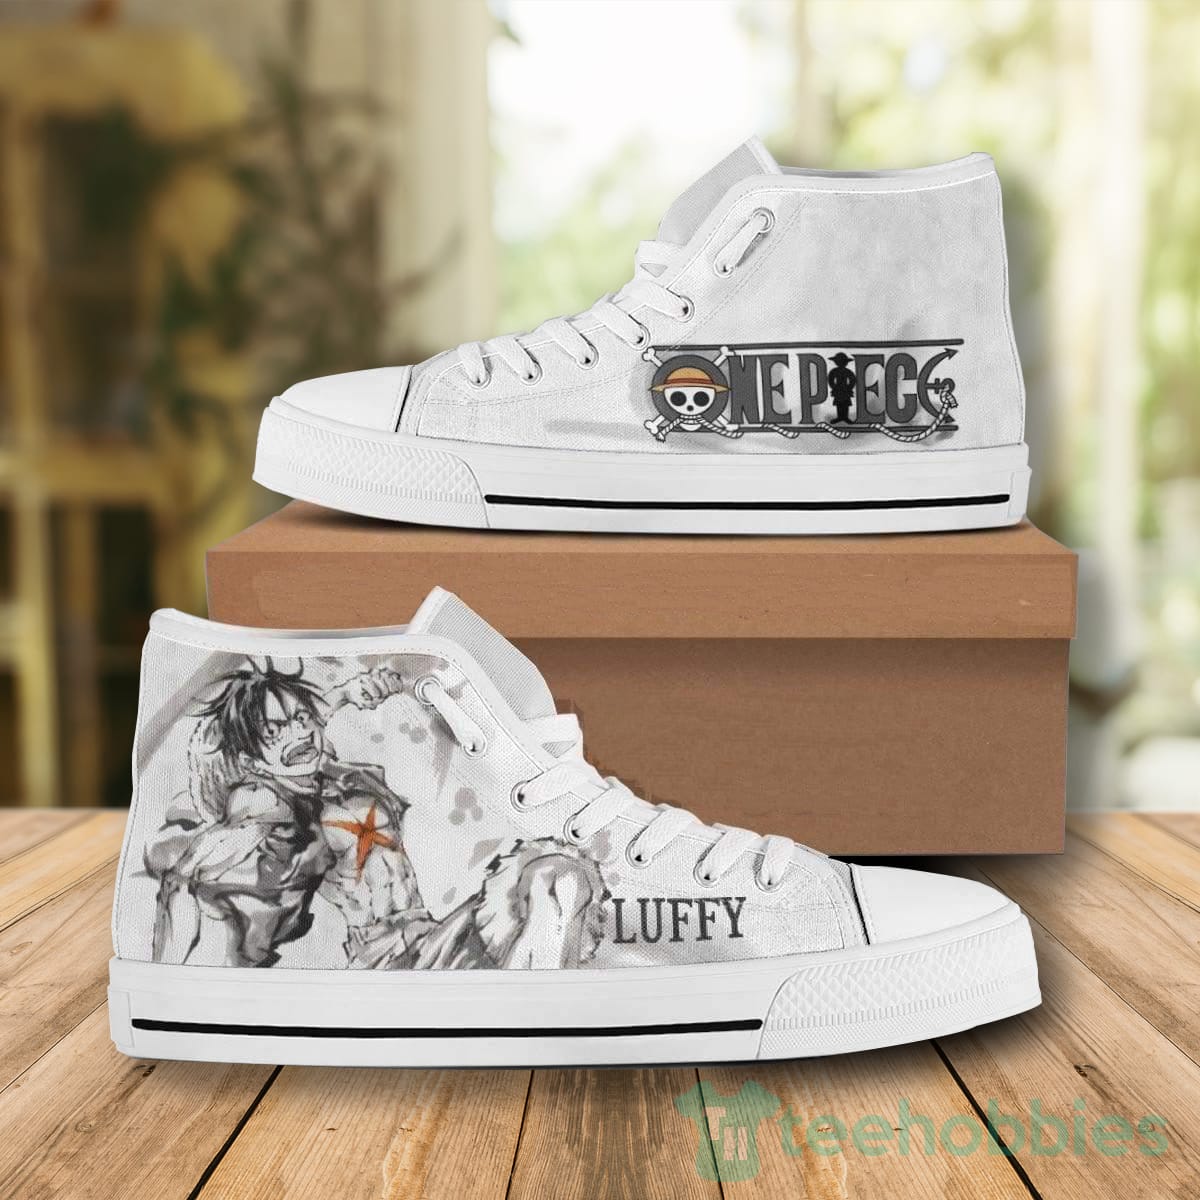 One Piece Luffy High Top Canvas Shoes